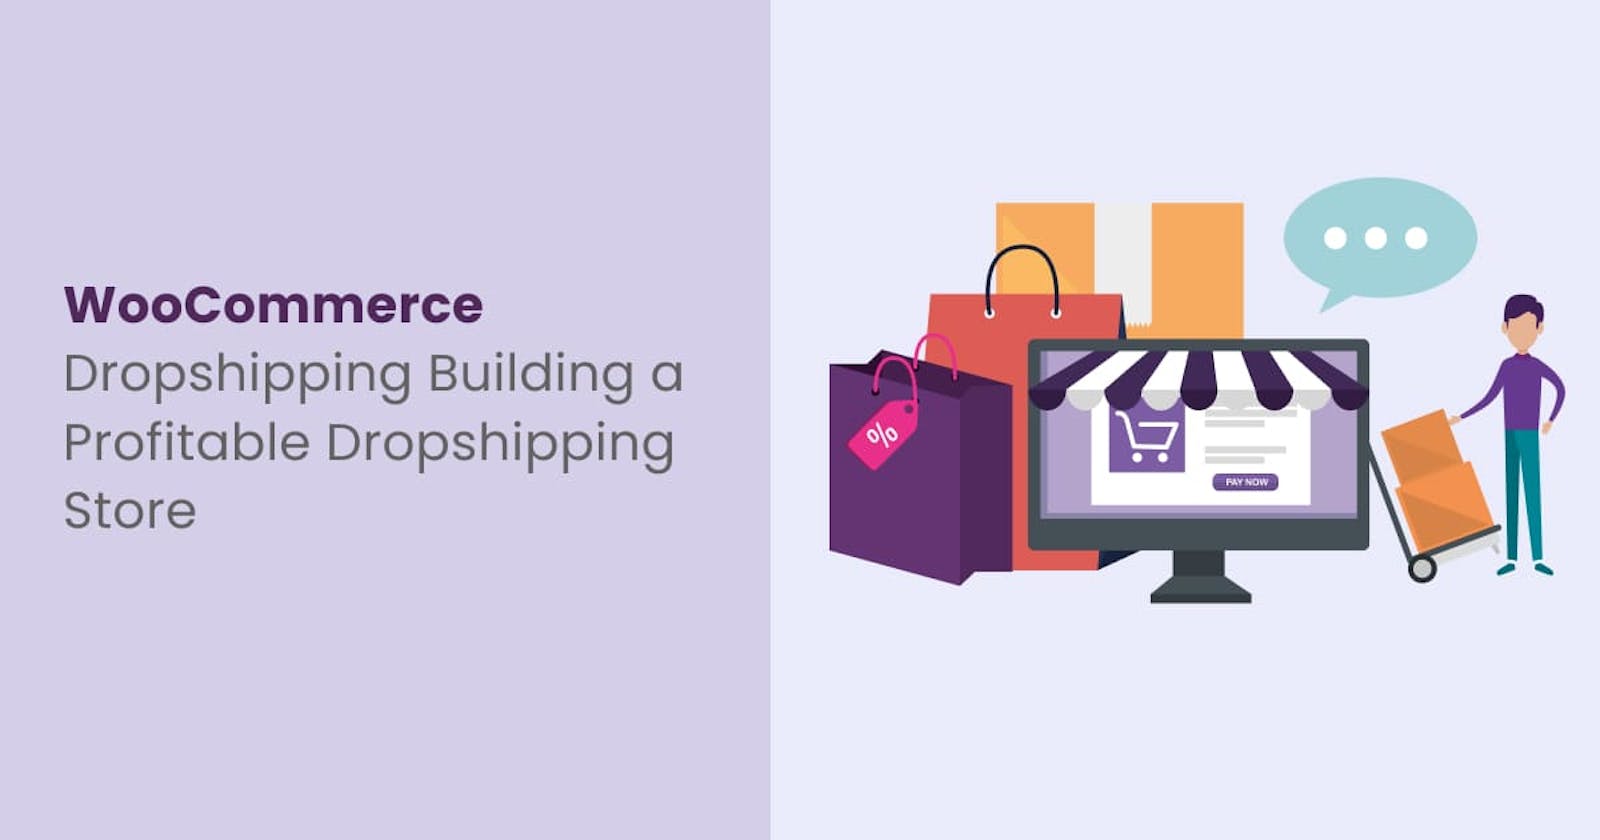 WooCommerce Dropshipping: Building a Profitable Dropshipping Store